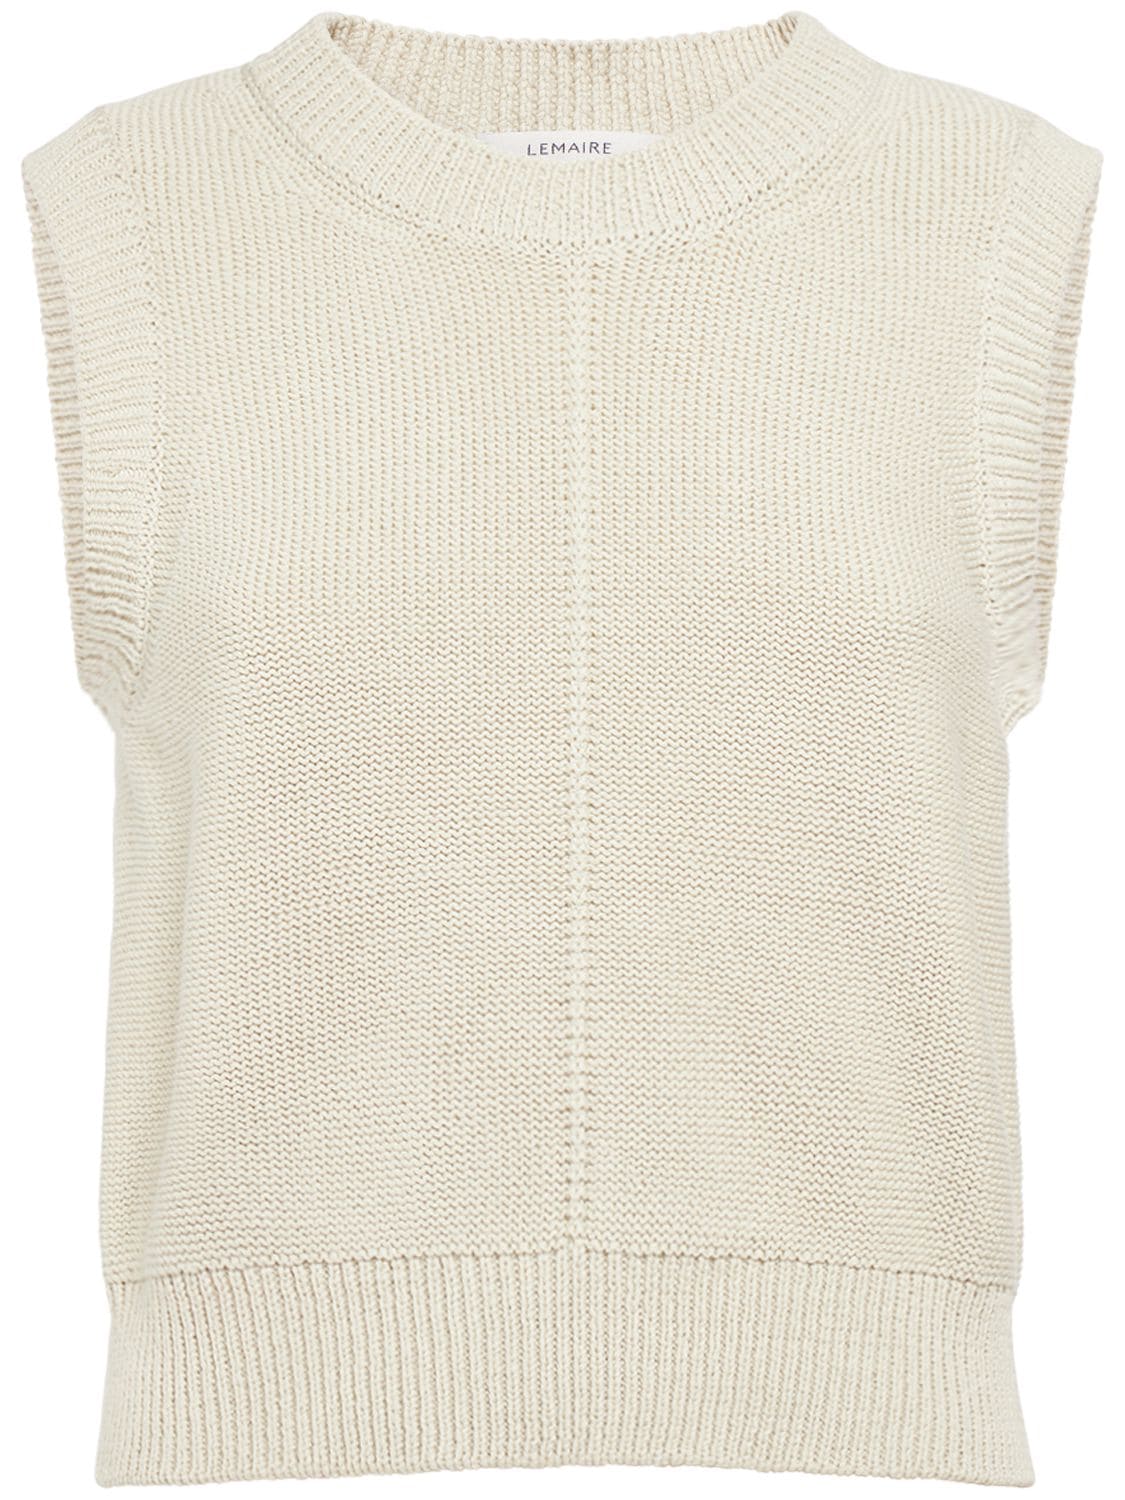 Lemaire Sleeveless Cropped Cotton Knit Sweater In Mastic